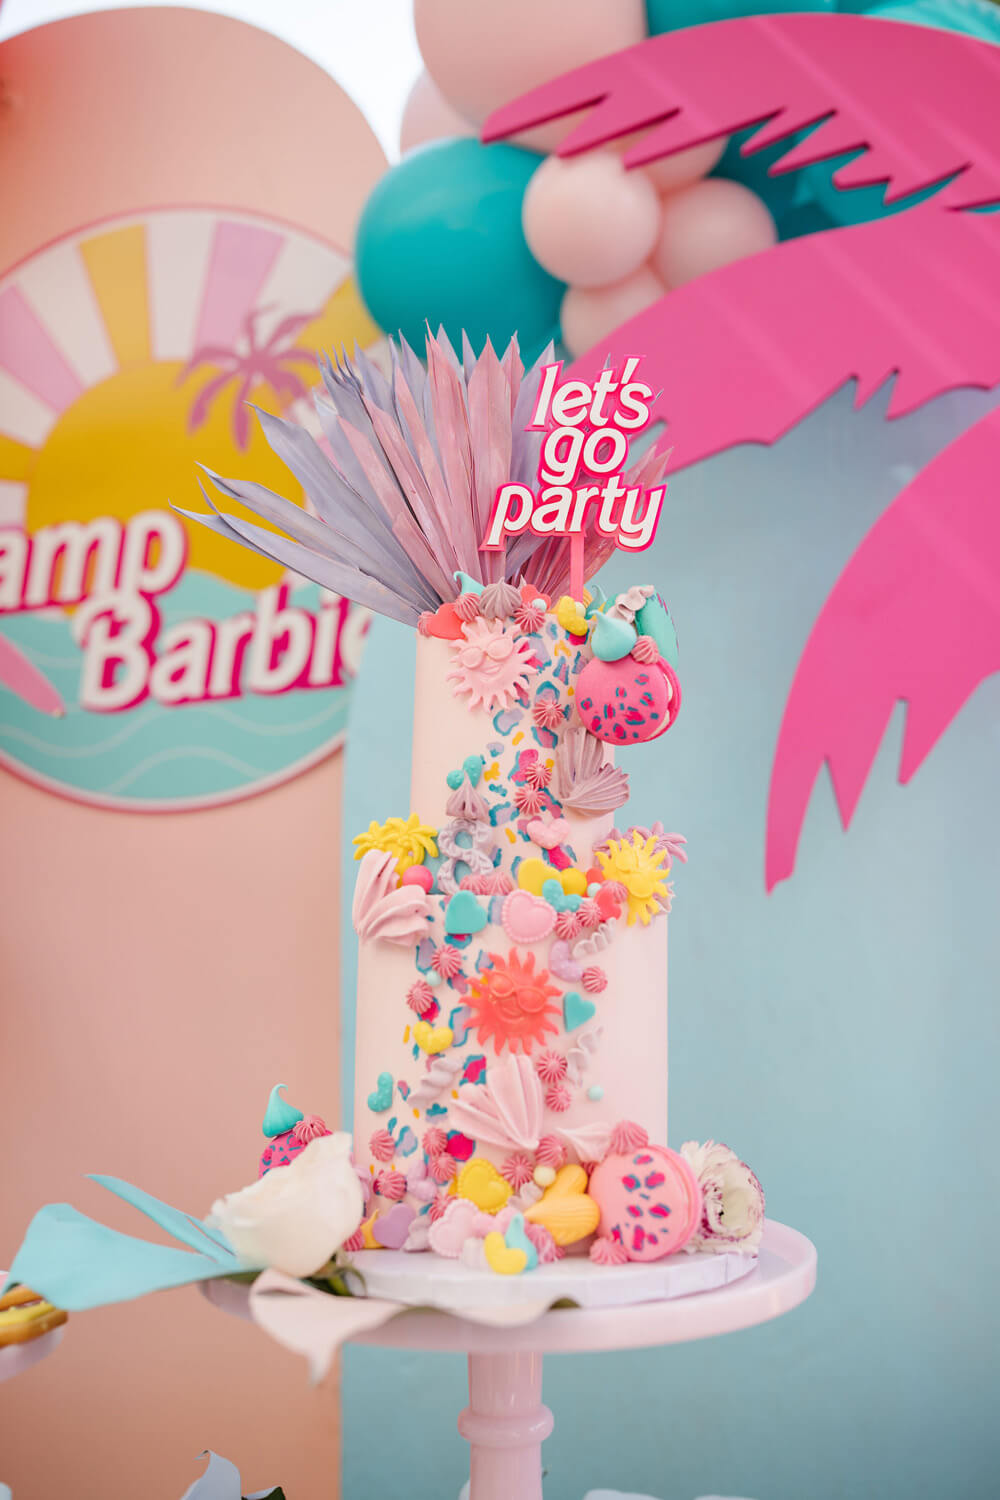 Barbie birthday cake with Let's Go Party cake topper